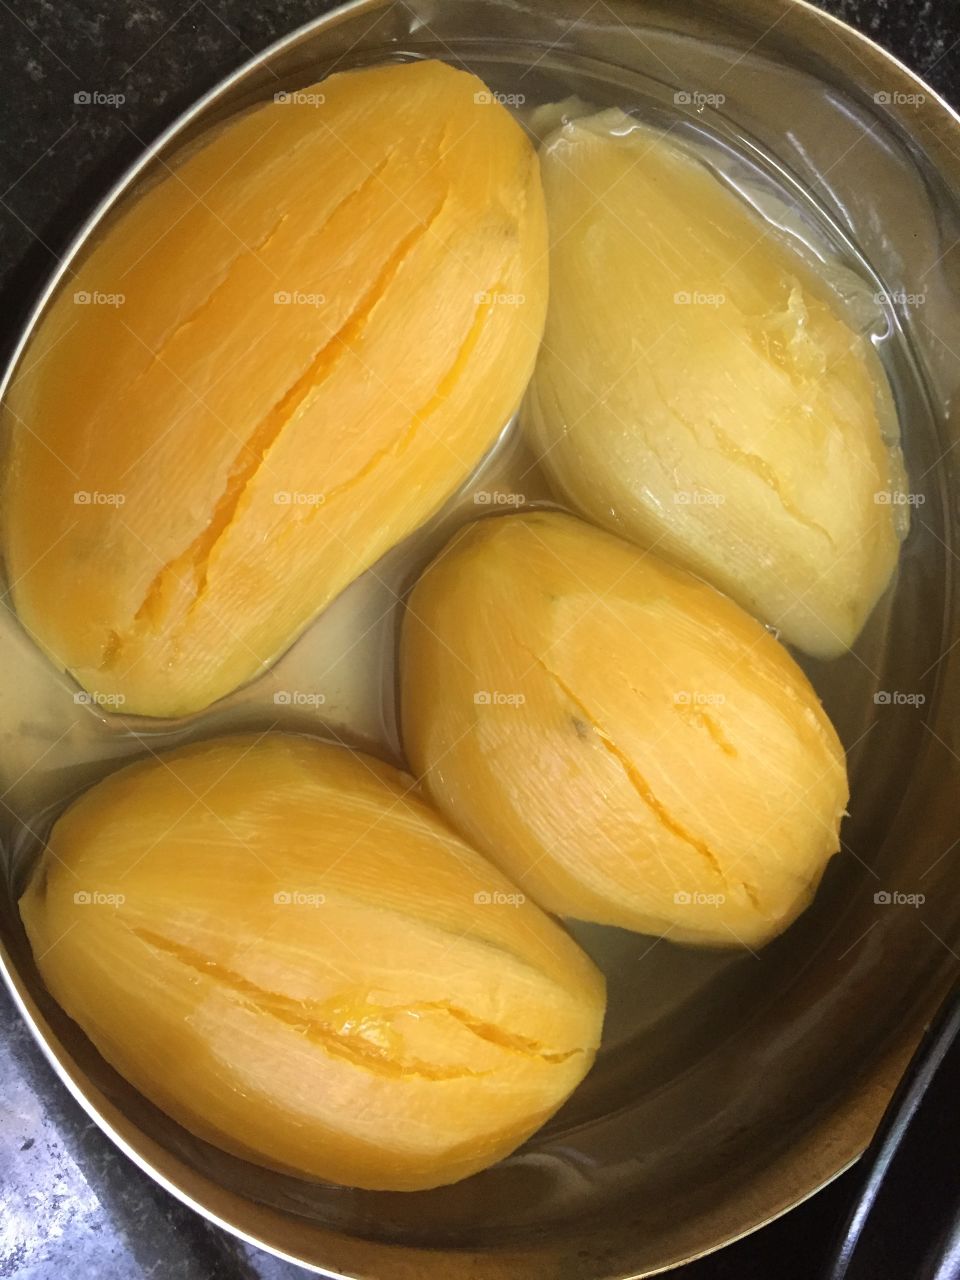 A traditional indian recipe we have do this every summer- *) take raw mangoes in a bowl fill it with water and cook them in a pressure cooker, rice cooker or solar cooker for15-20 take out a little water add sugar, blend add more water in concetrate 